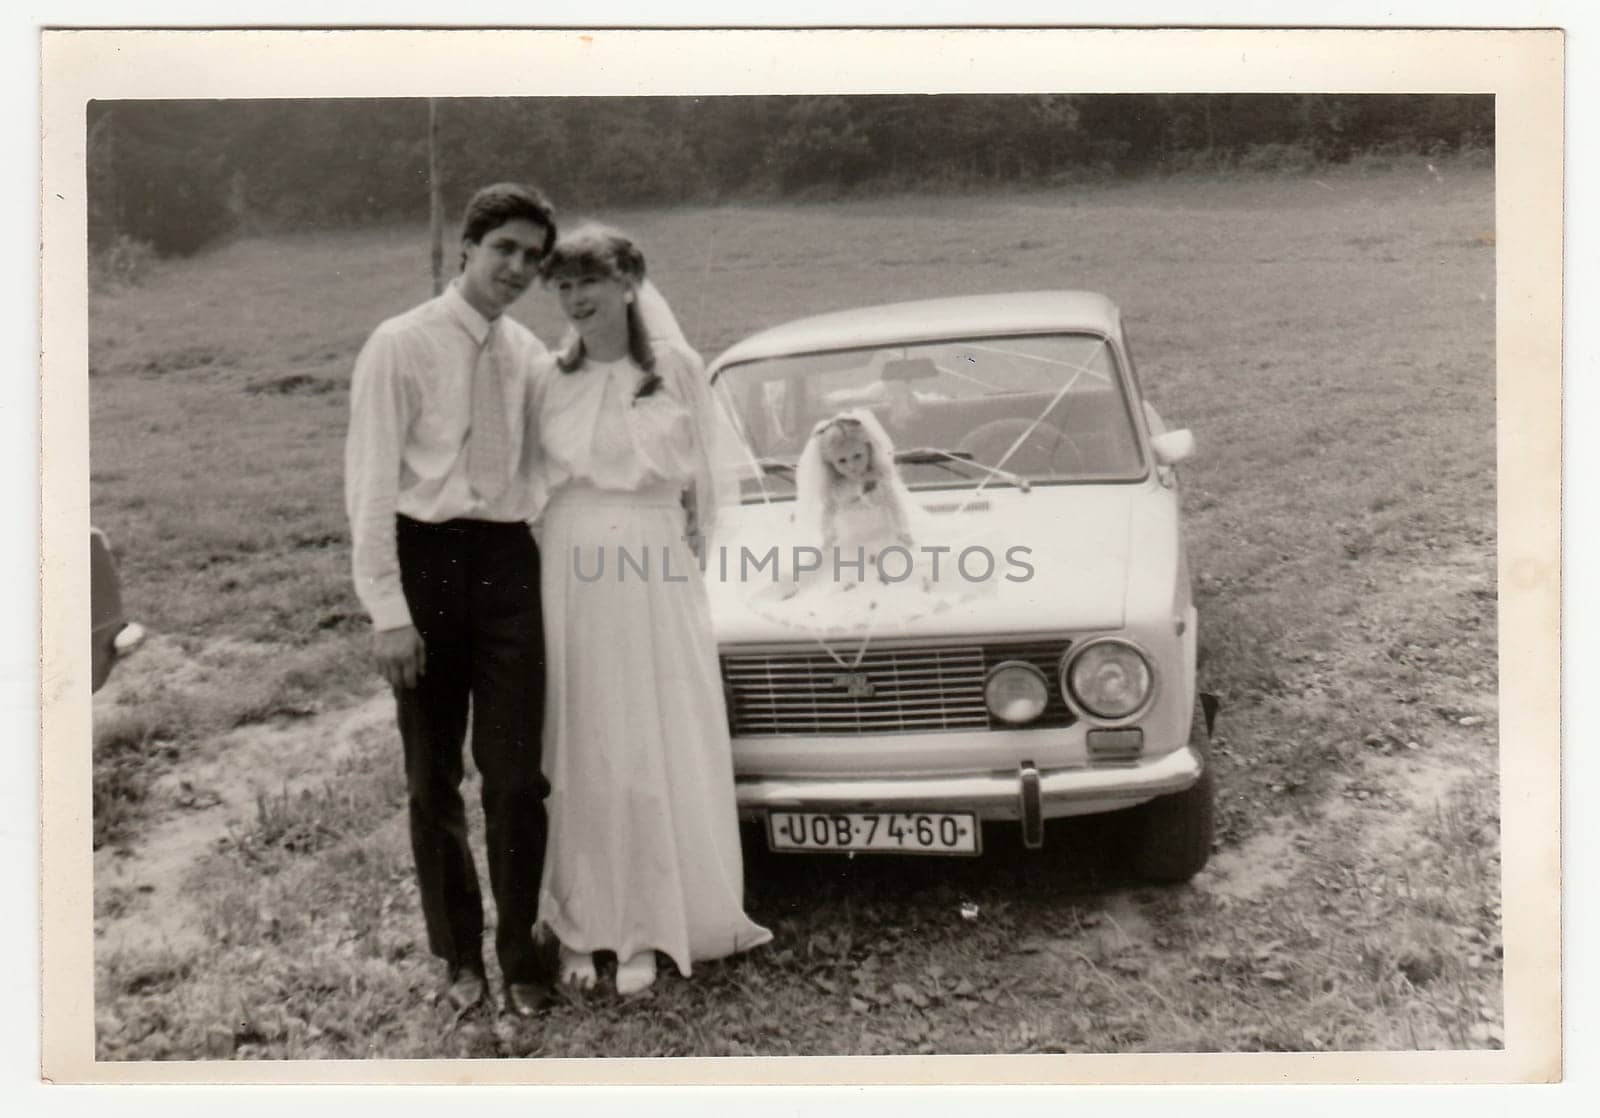 THE CZECHOSLOVAK SOCIALIST REPUBLIC - CIRCA 1970s: Retro photo shows newlyweds and wedding car. Black and white vintage photography.